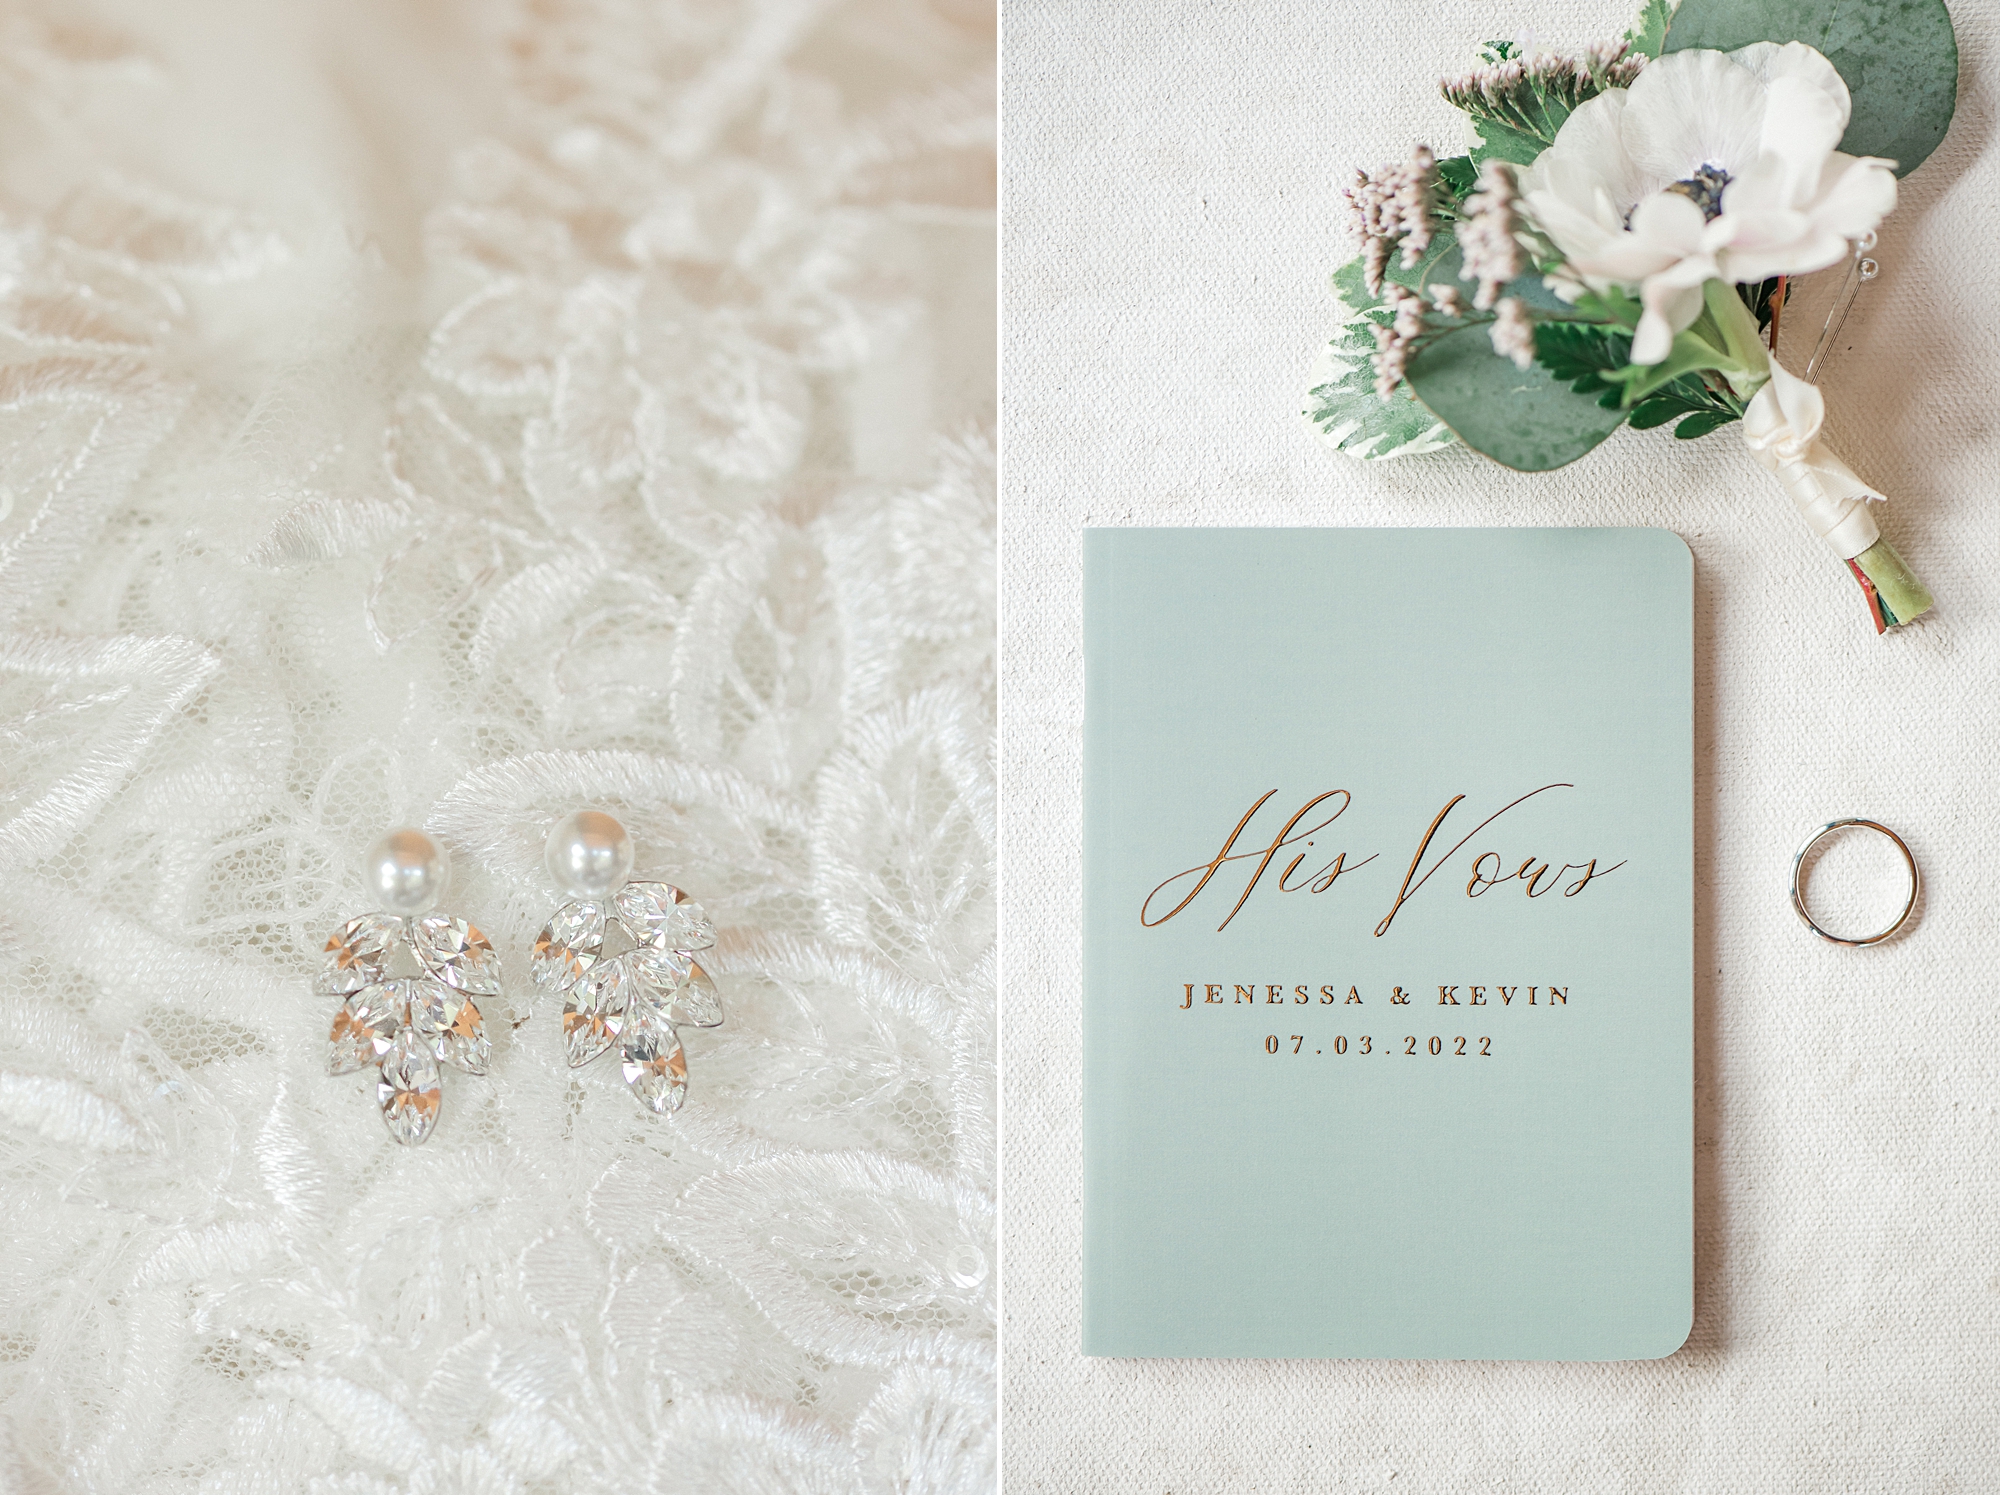 earrings and vow book from Carriage House wedding